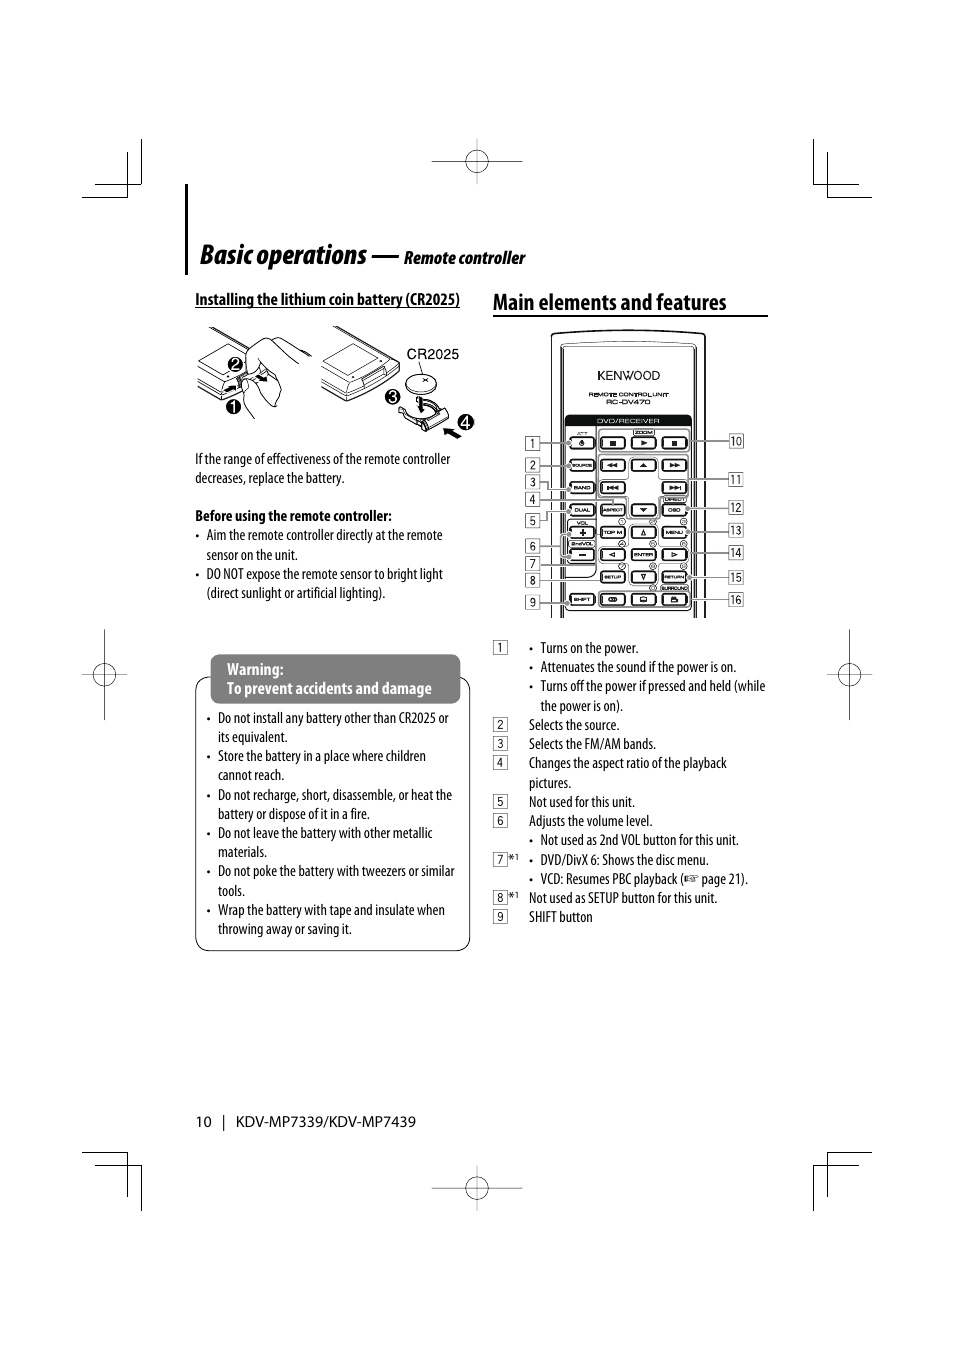 Basic operations, Main elements and features | Kenwood KDV-MP7339 User Manual | Page 10 / 44